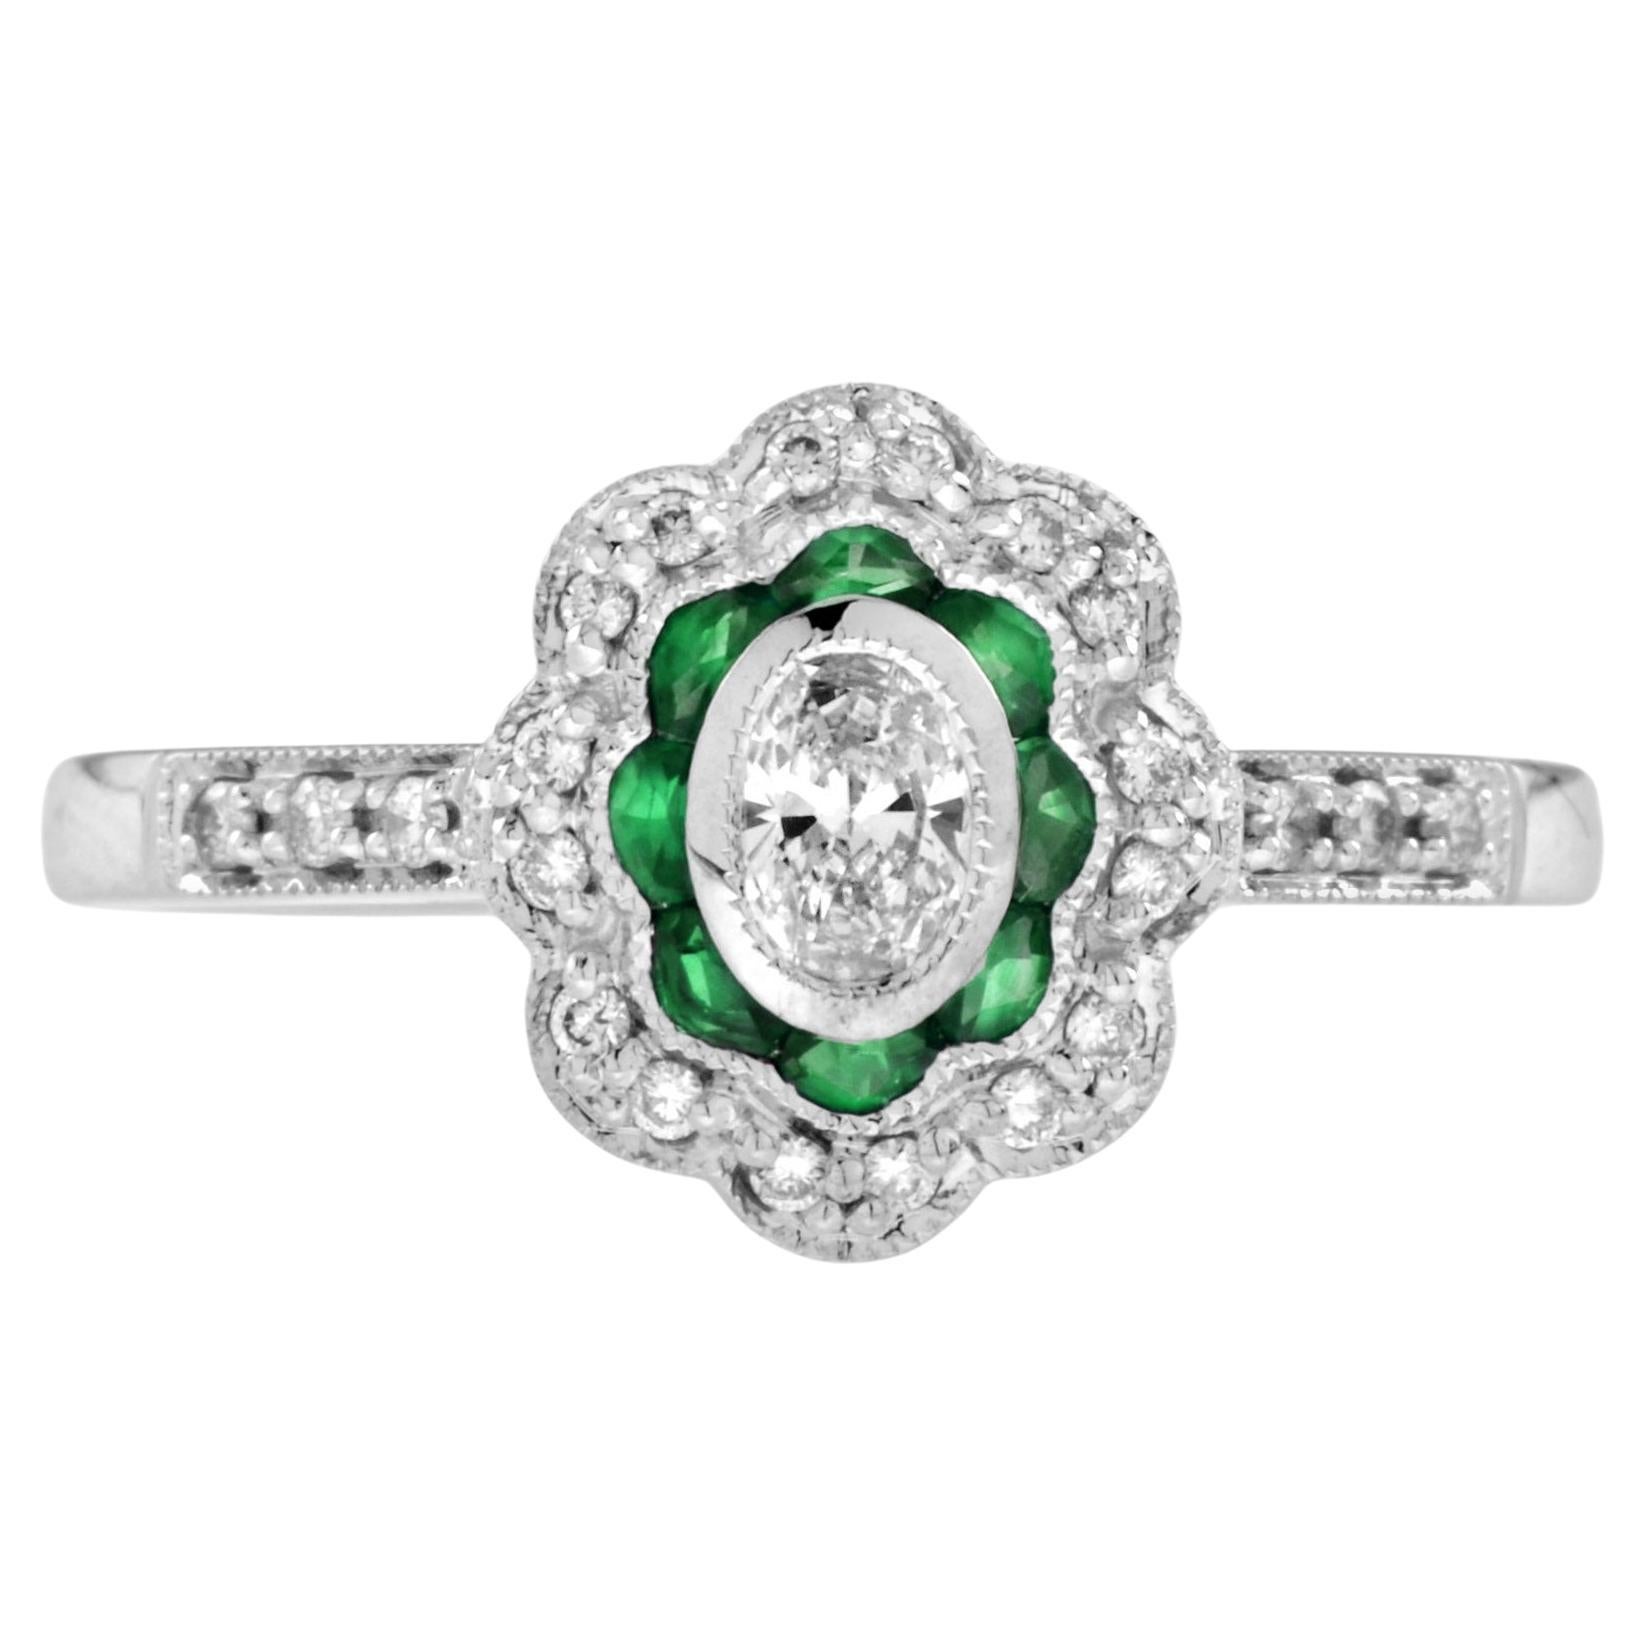 0.15 Ct. Diamond and Emerald Art Deco Style Engagement Ring in 18K White Gold For Sale